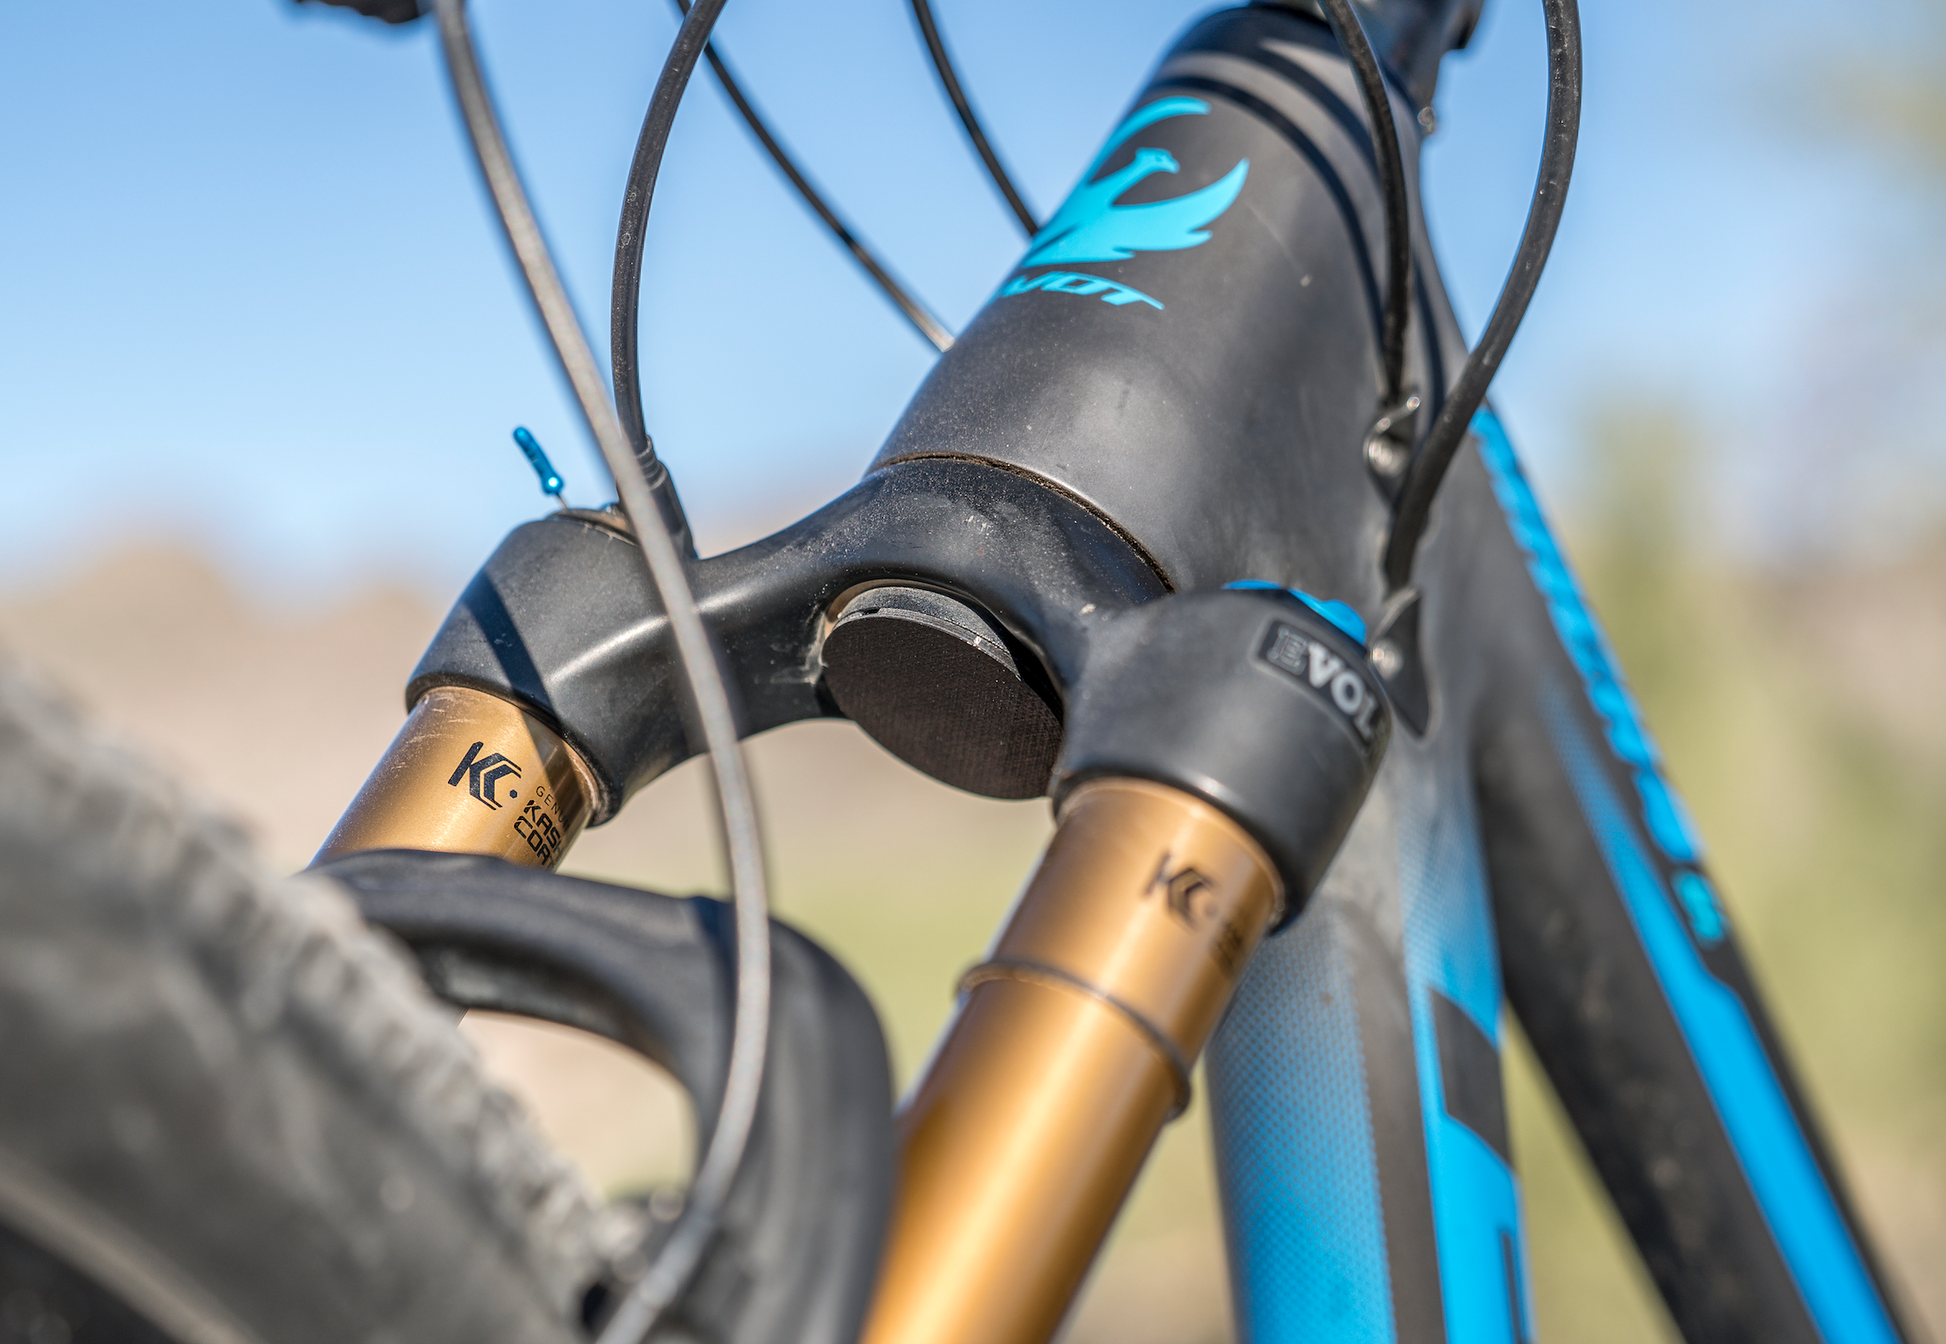 Stealth Tag Fork- designed to hide your Airtag in the steer tube of mountain bike forks in a discreet location for antitheft 